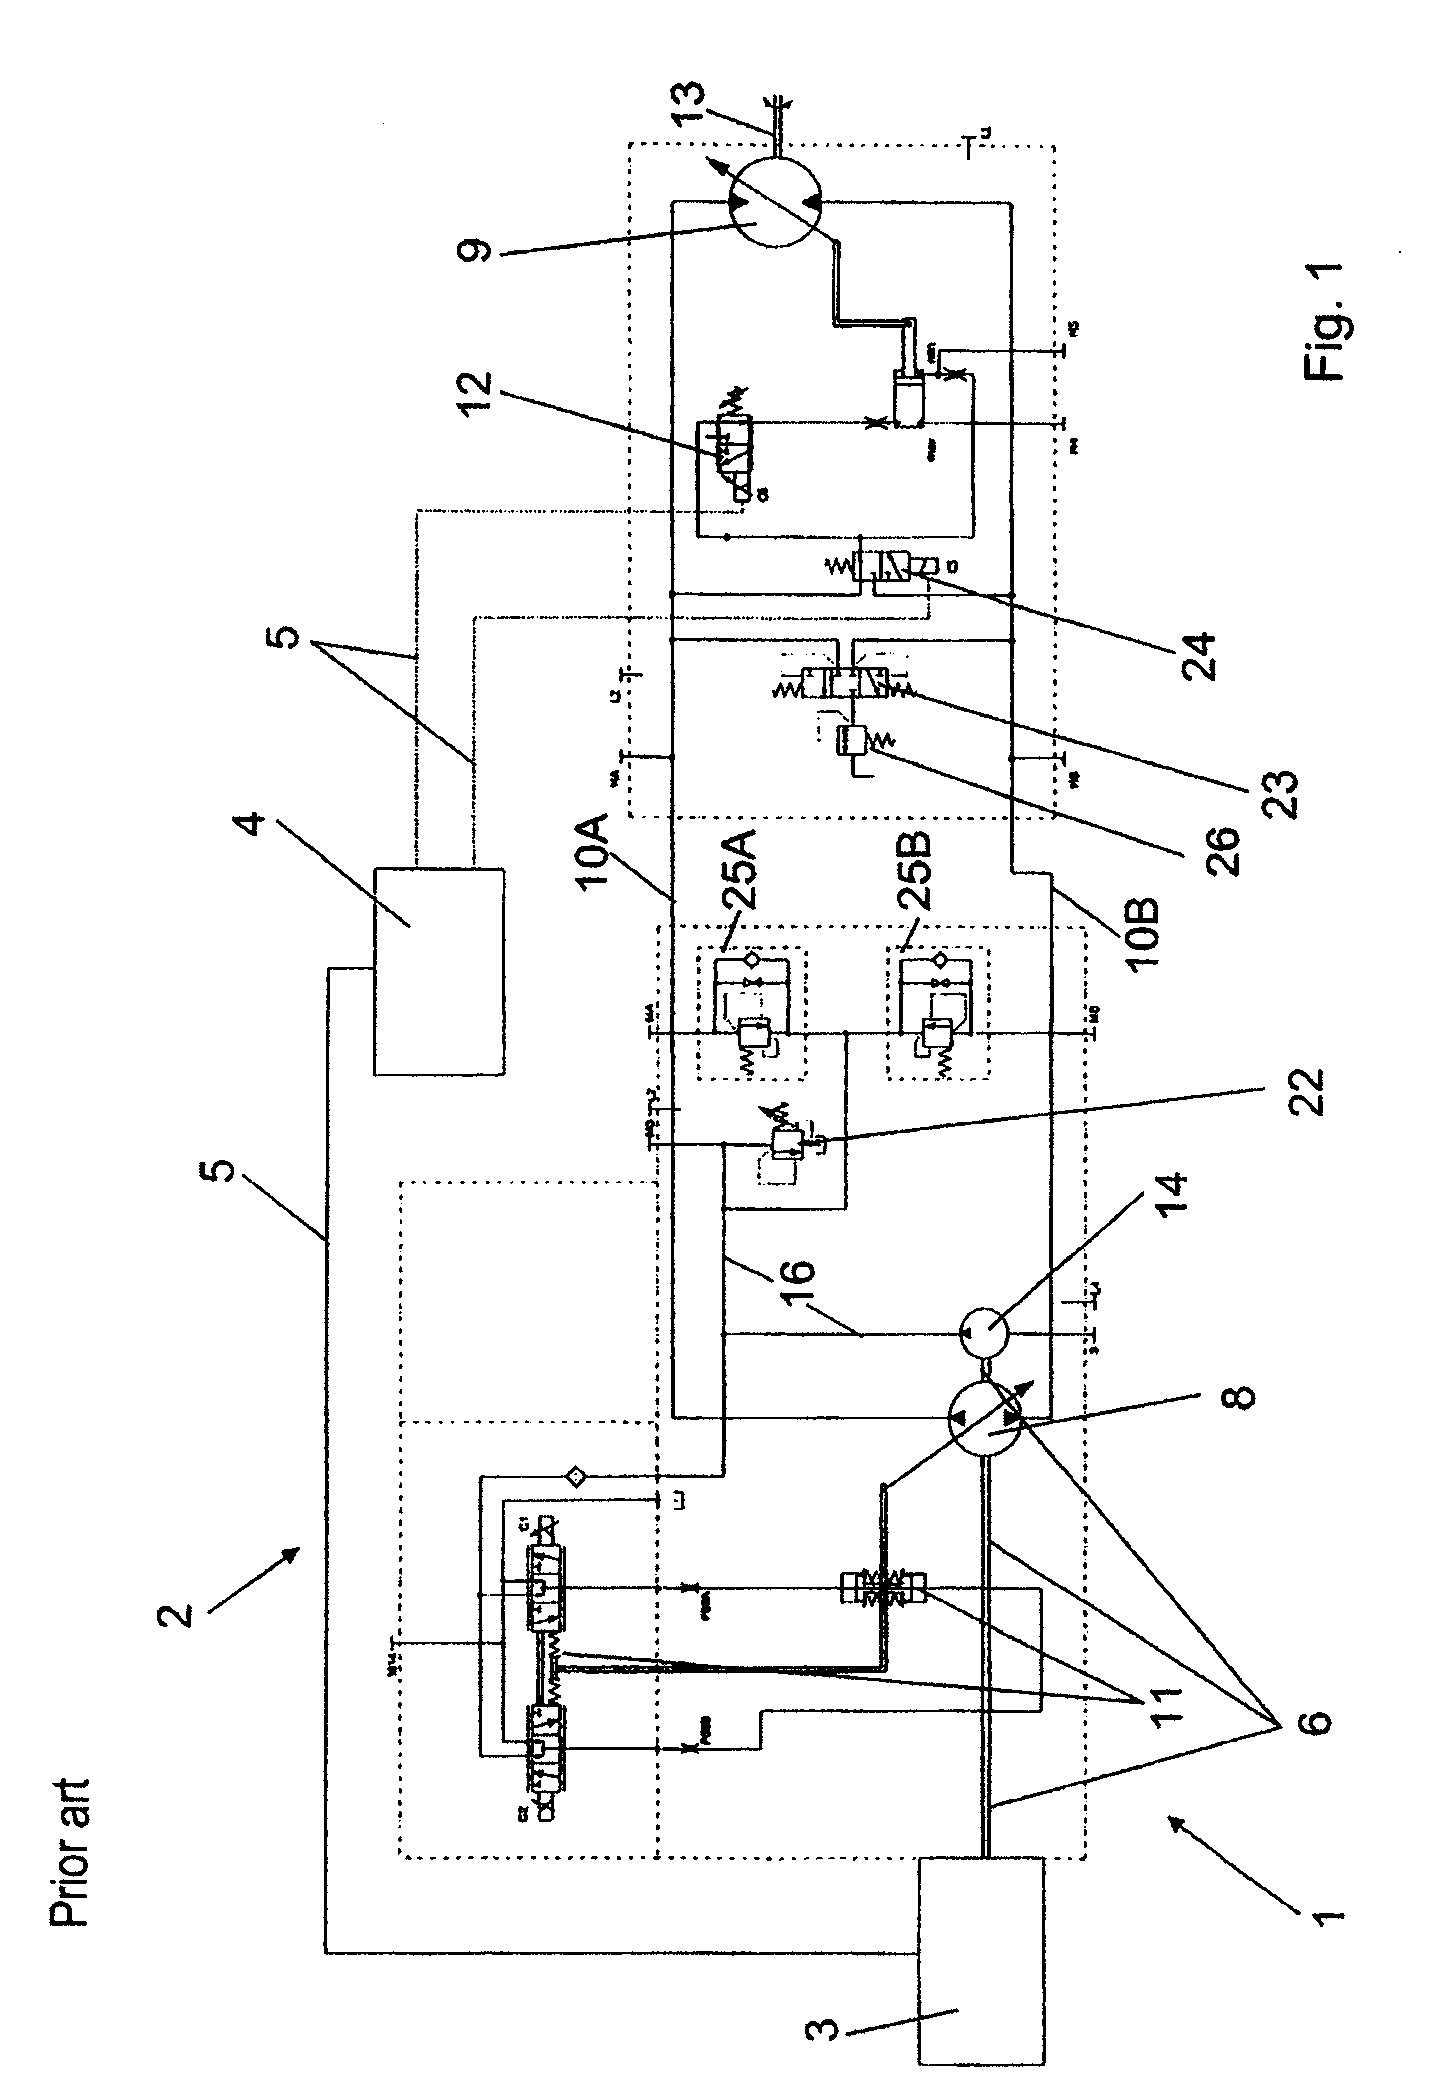 Hydraulic drive with an independent charge pump